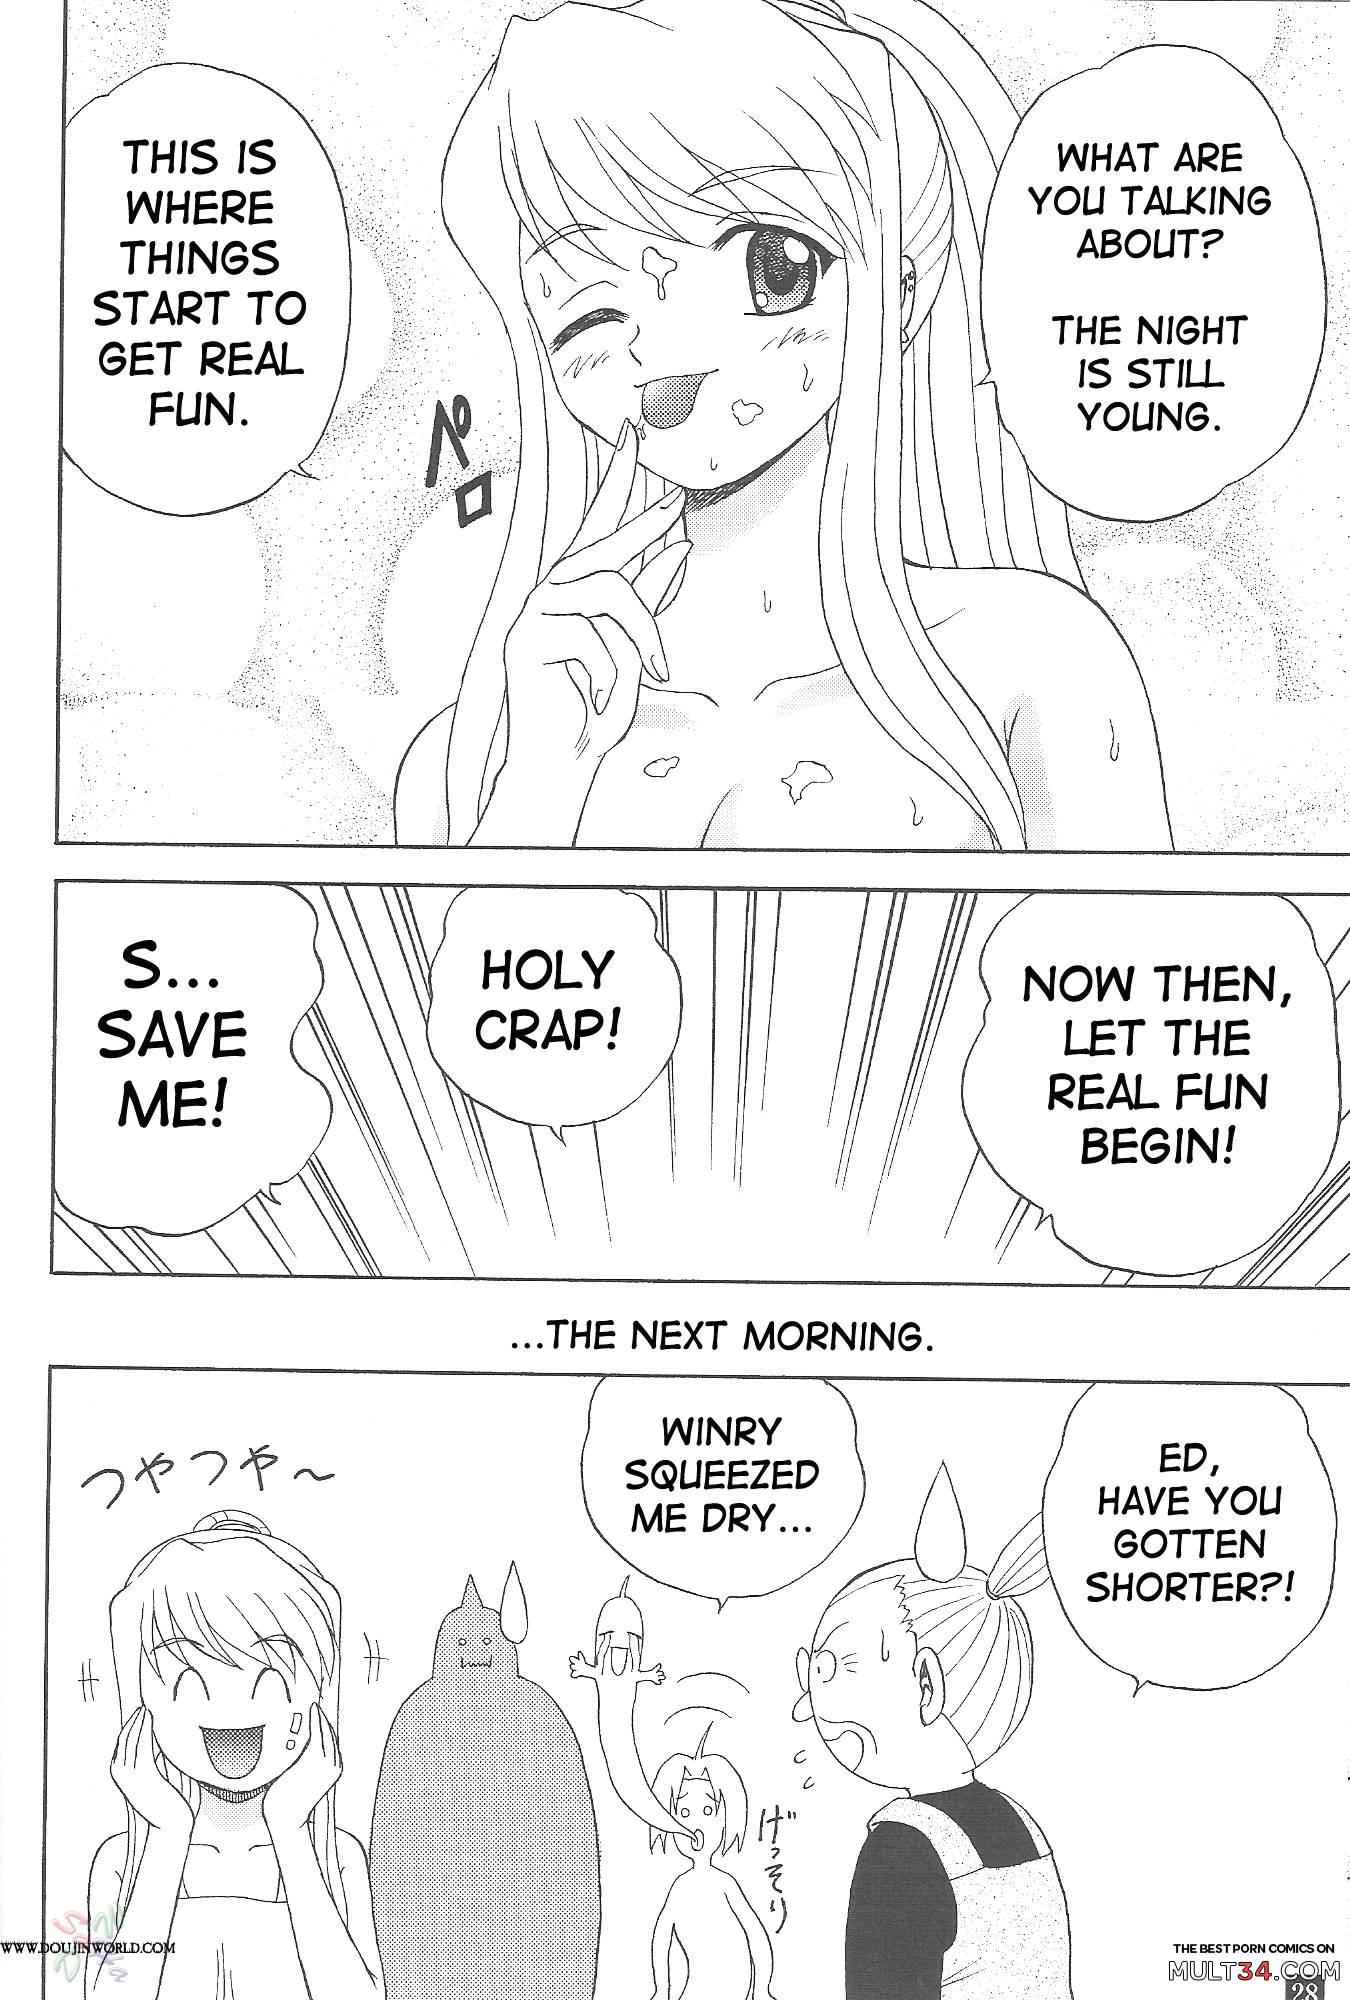 Winry's Vibrator page 27